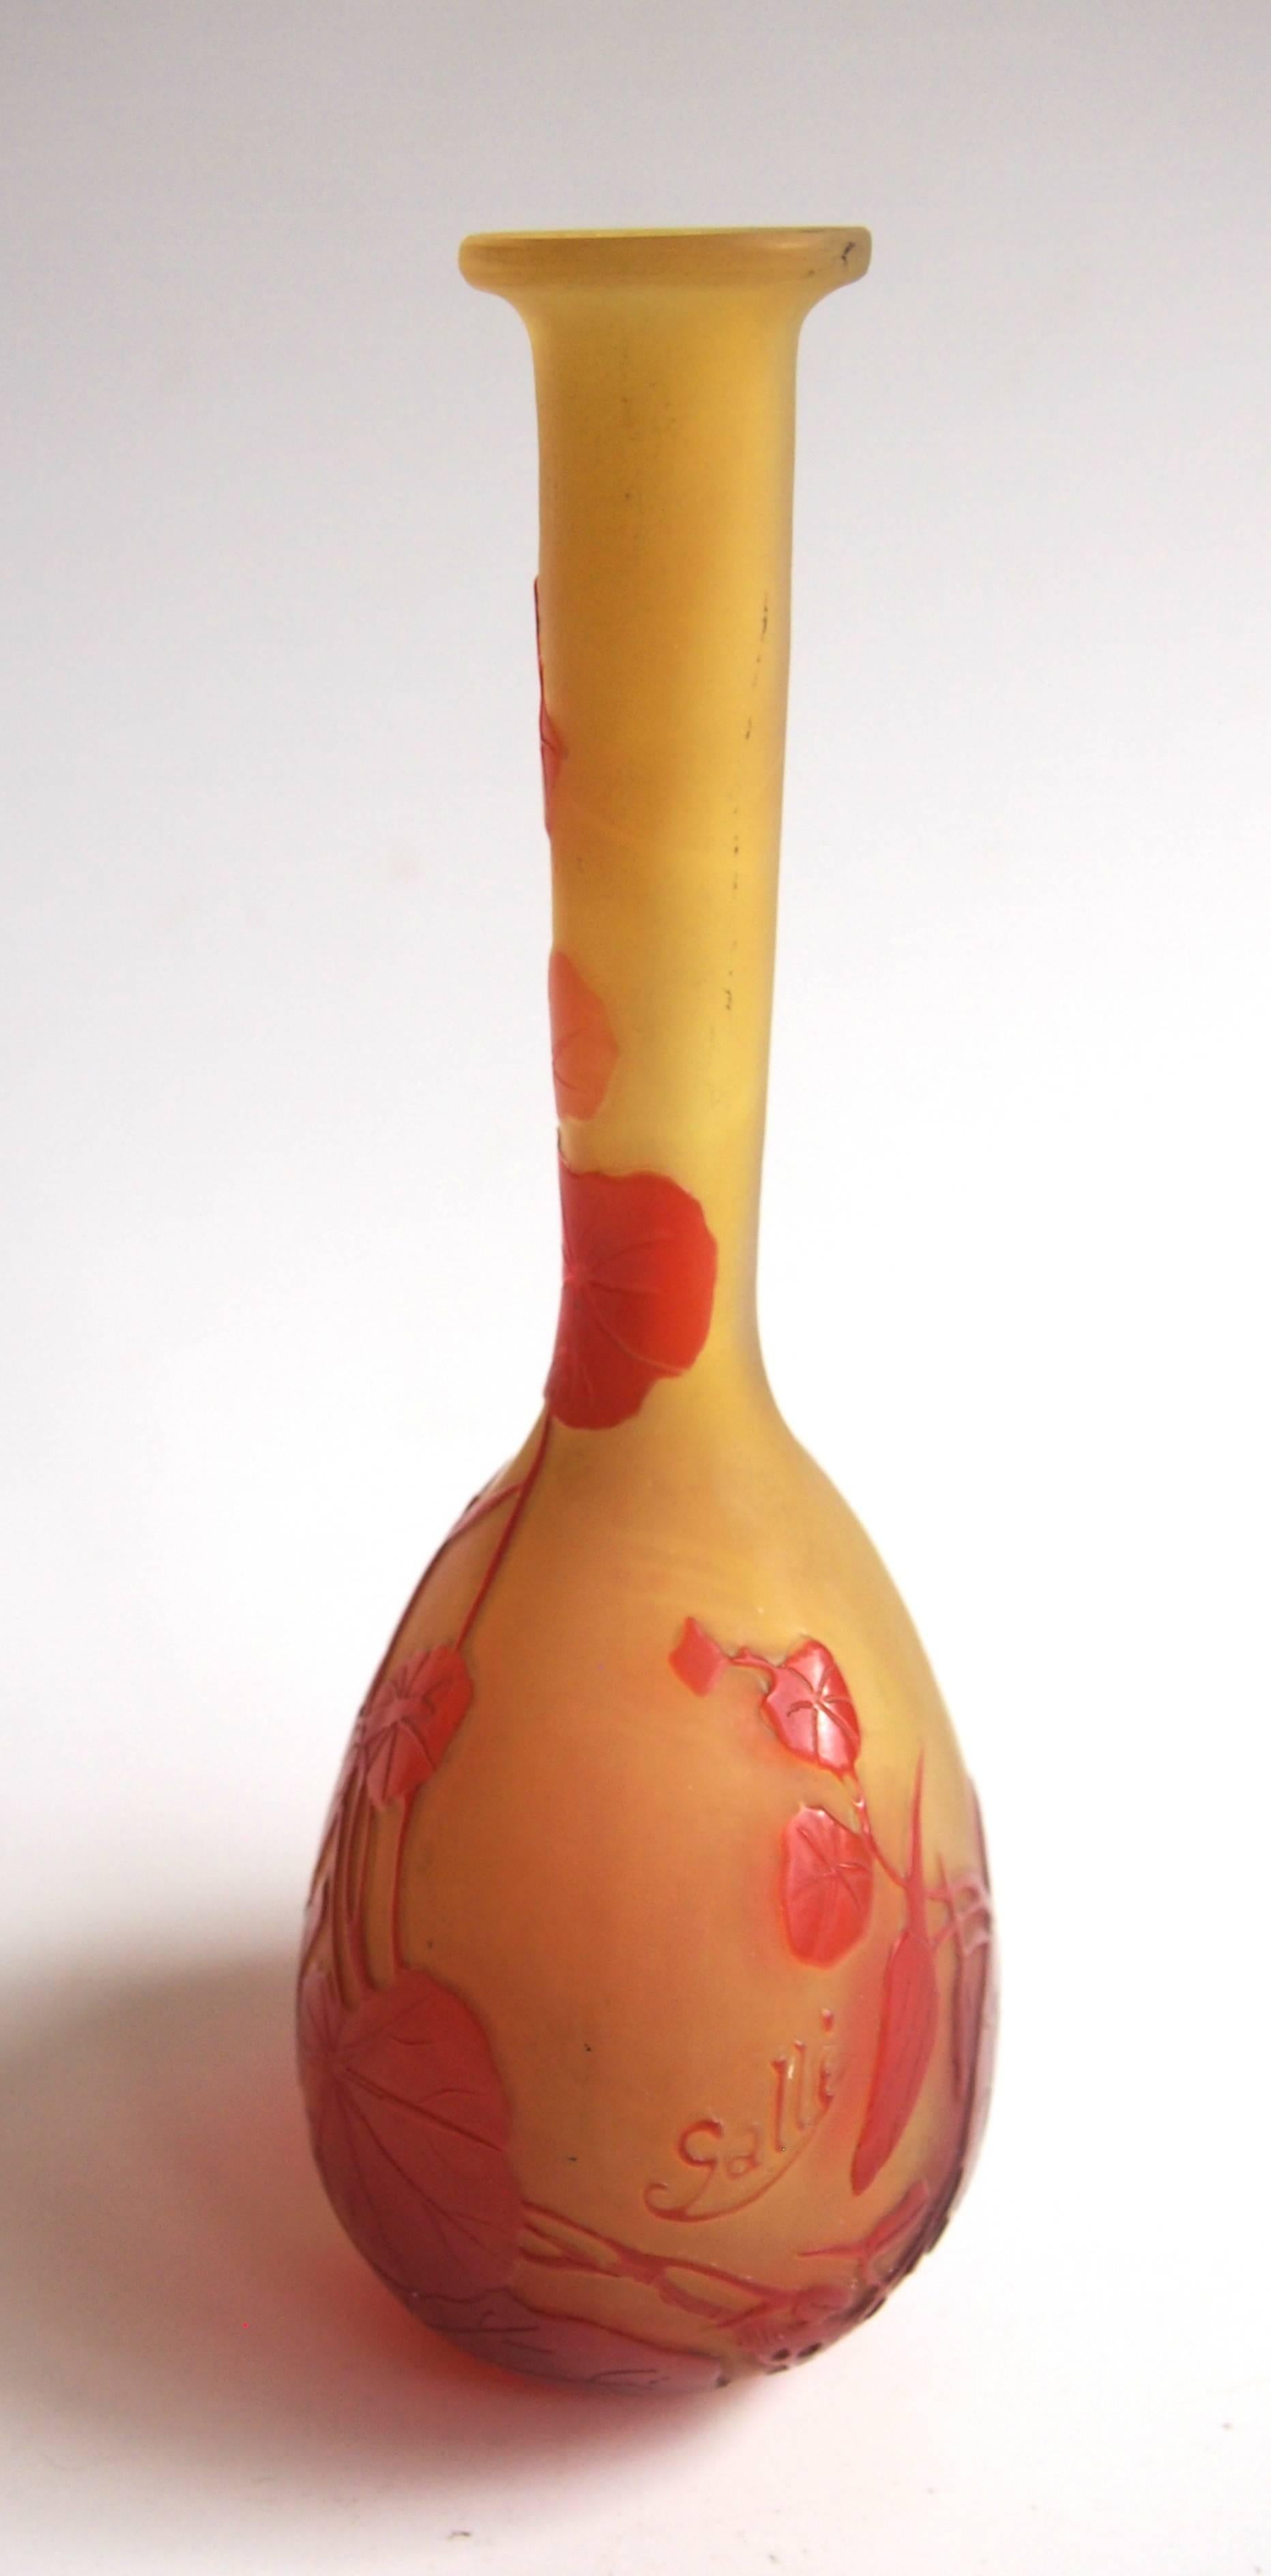 Classic Art Nouveau Emile Galle 'Banjo' vase, depicting Nasturtium blooms in vibrant red over orange. Emile Galle Cameo Banjo vases (so called because they vaguely resemble that shape) are amongst the most collected of Emile Galle shapes with many